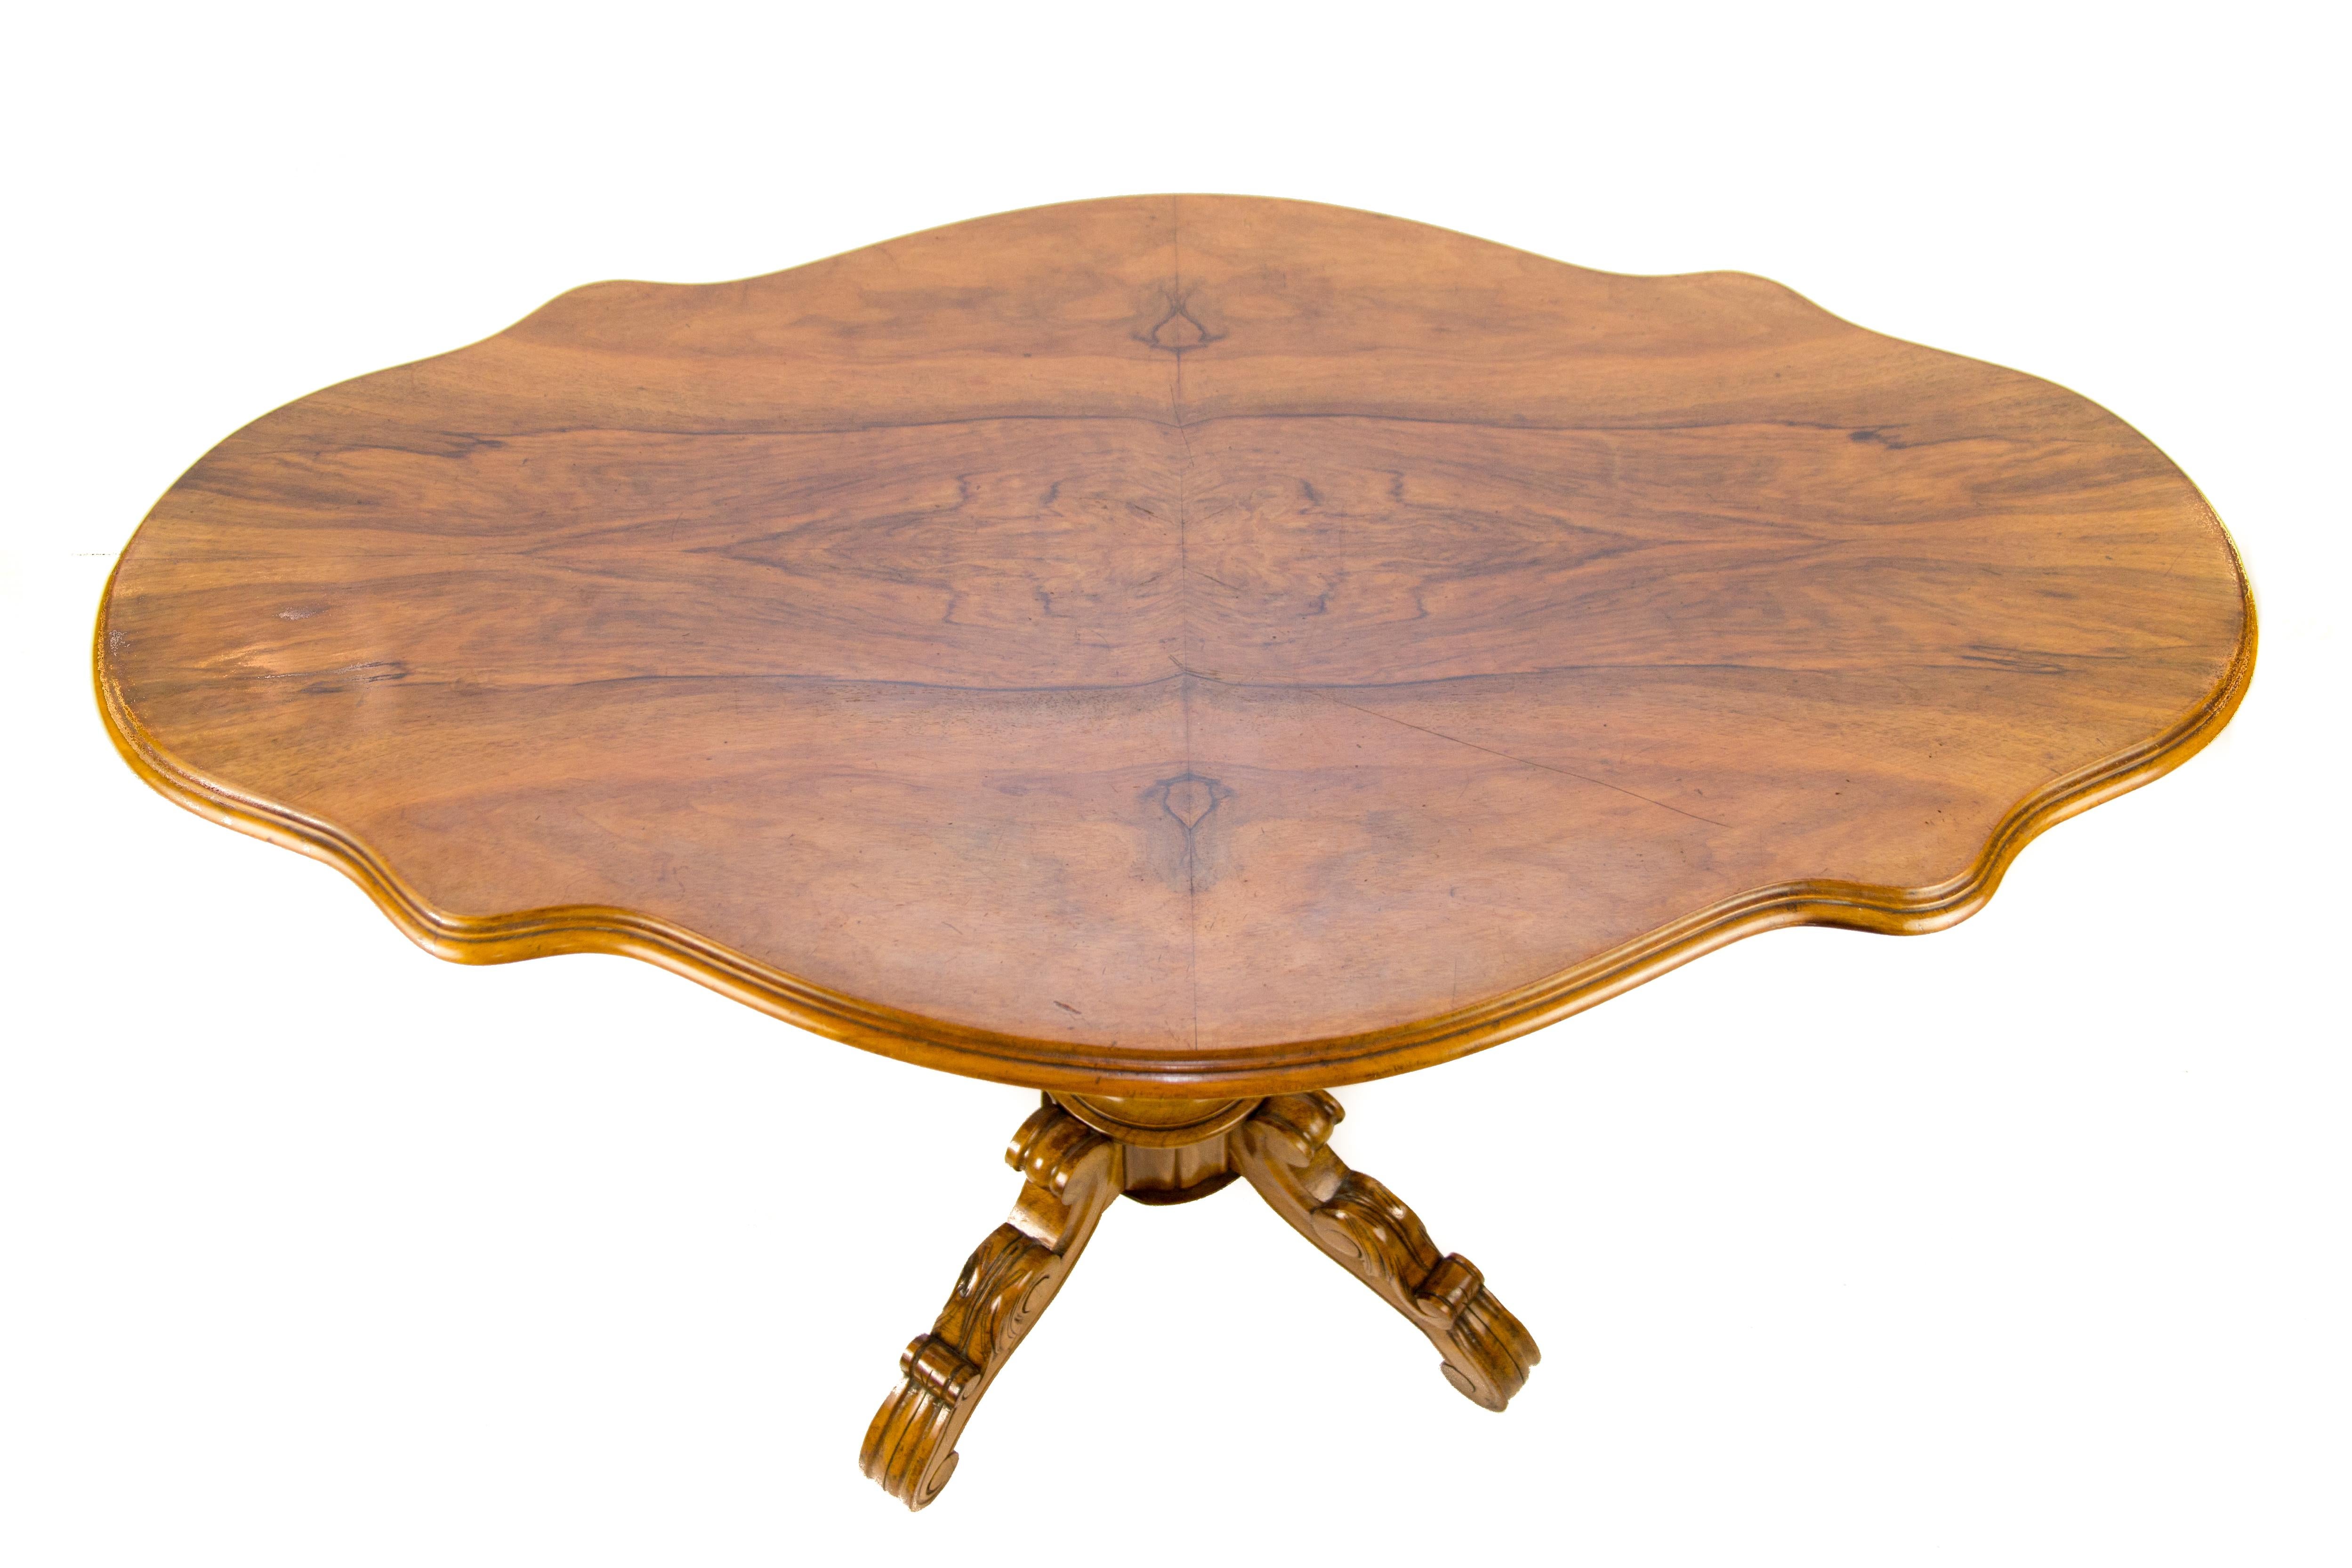 Oval Victorian Style tilt-top center or dessert table, circa 1920s.
Dimensions:
Height: 73 cm / 28.74 in, width: 63 cm / 24.8 in, length: 110 cm / 43.3 in.
 